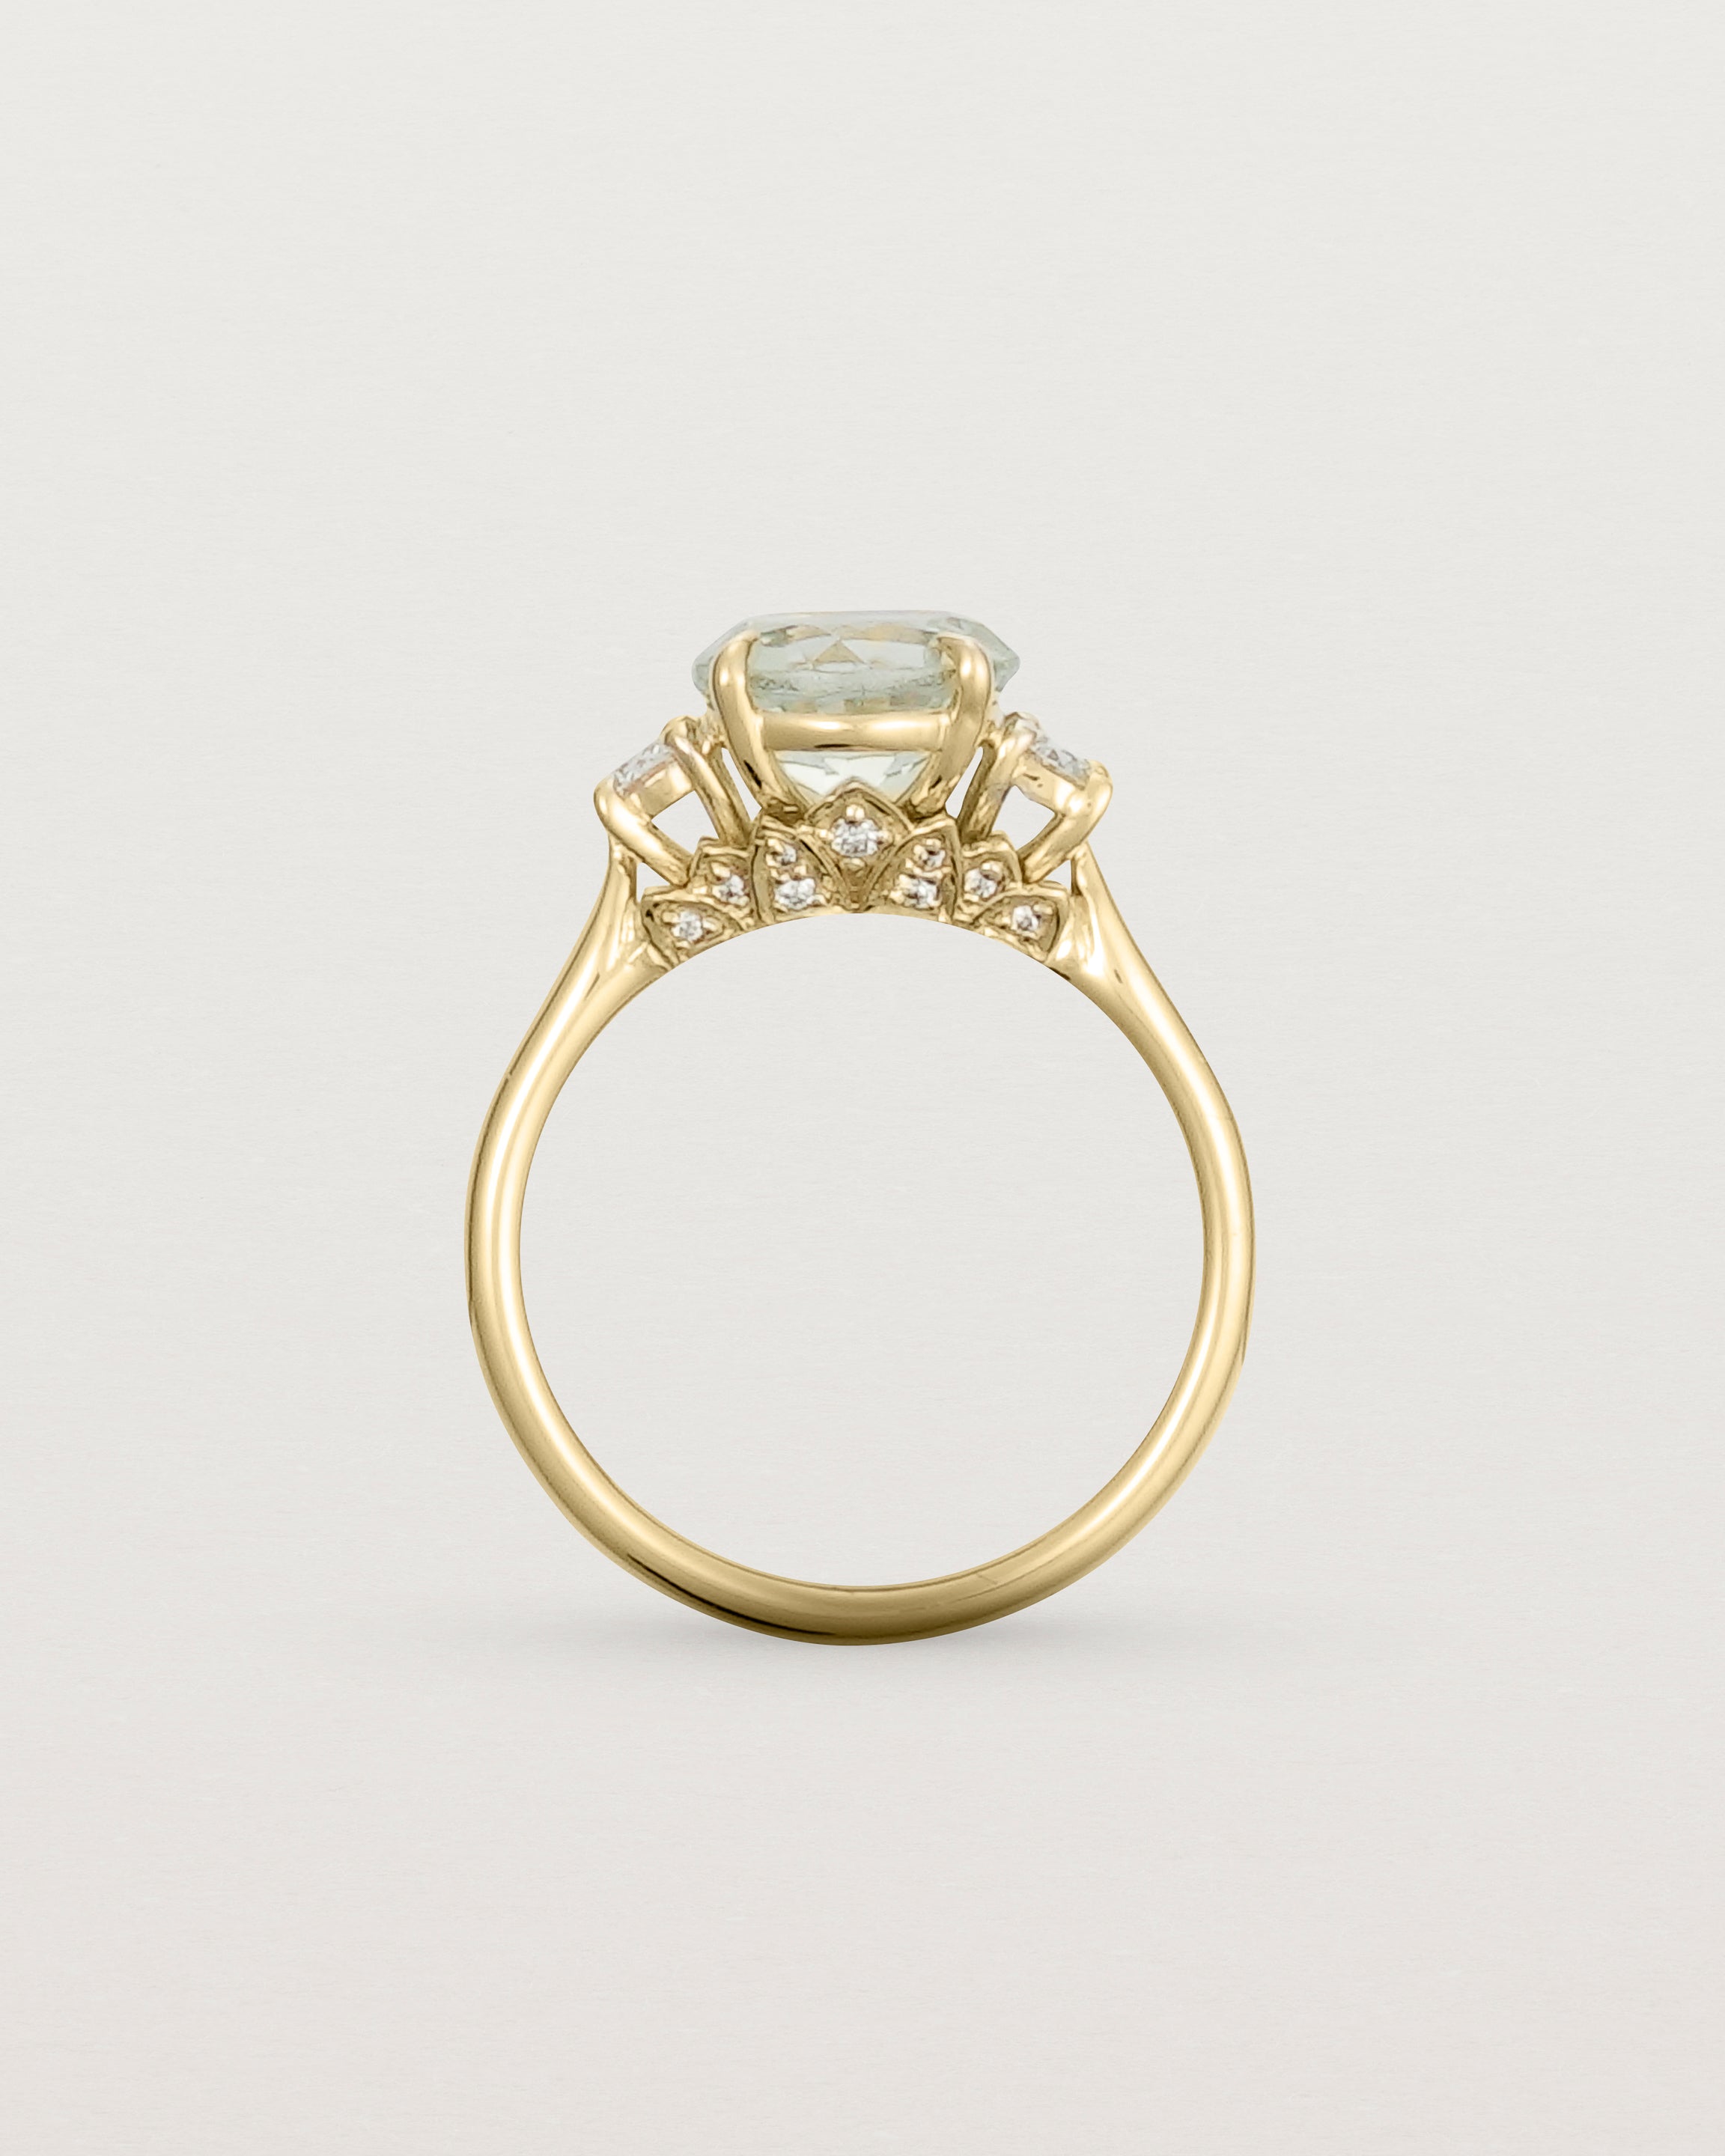 Standing view of the Laurel Round Trio Ring | Green Amethyst | Yellow Gold.